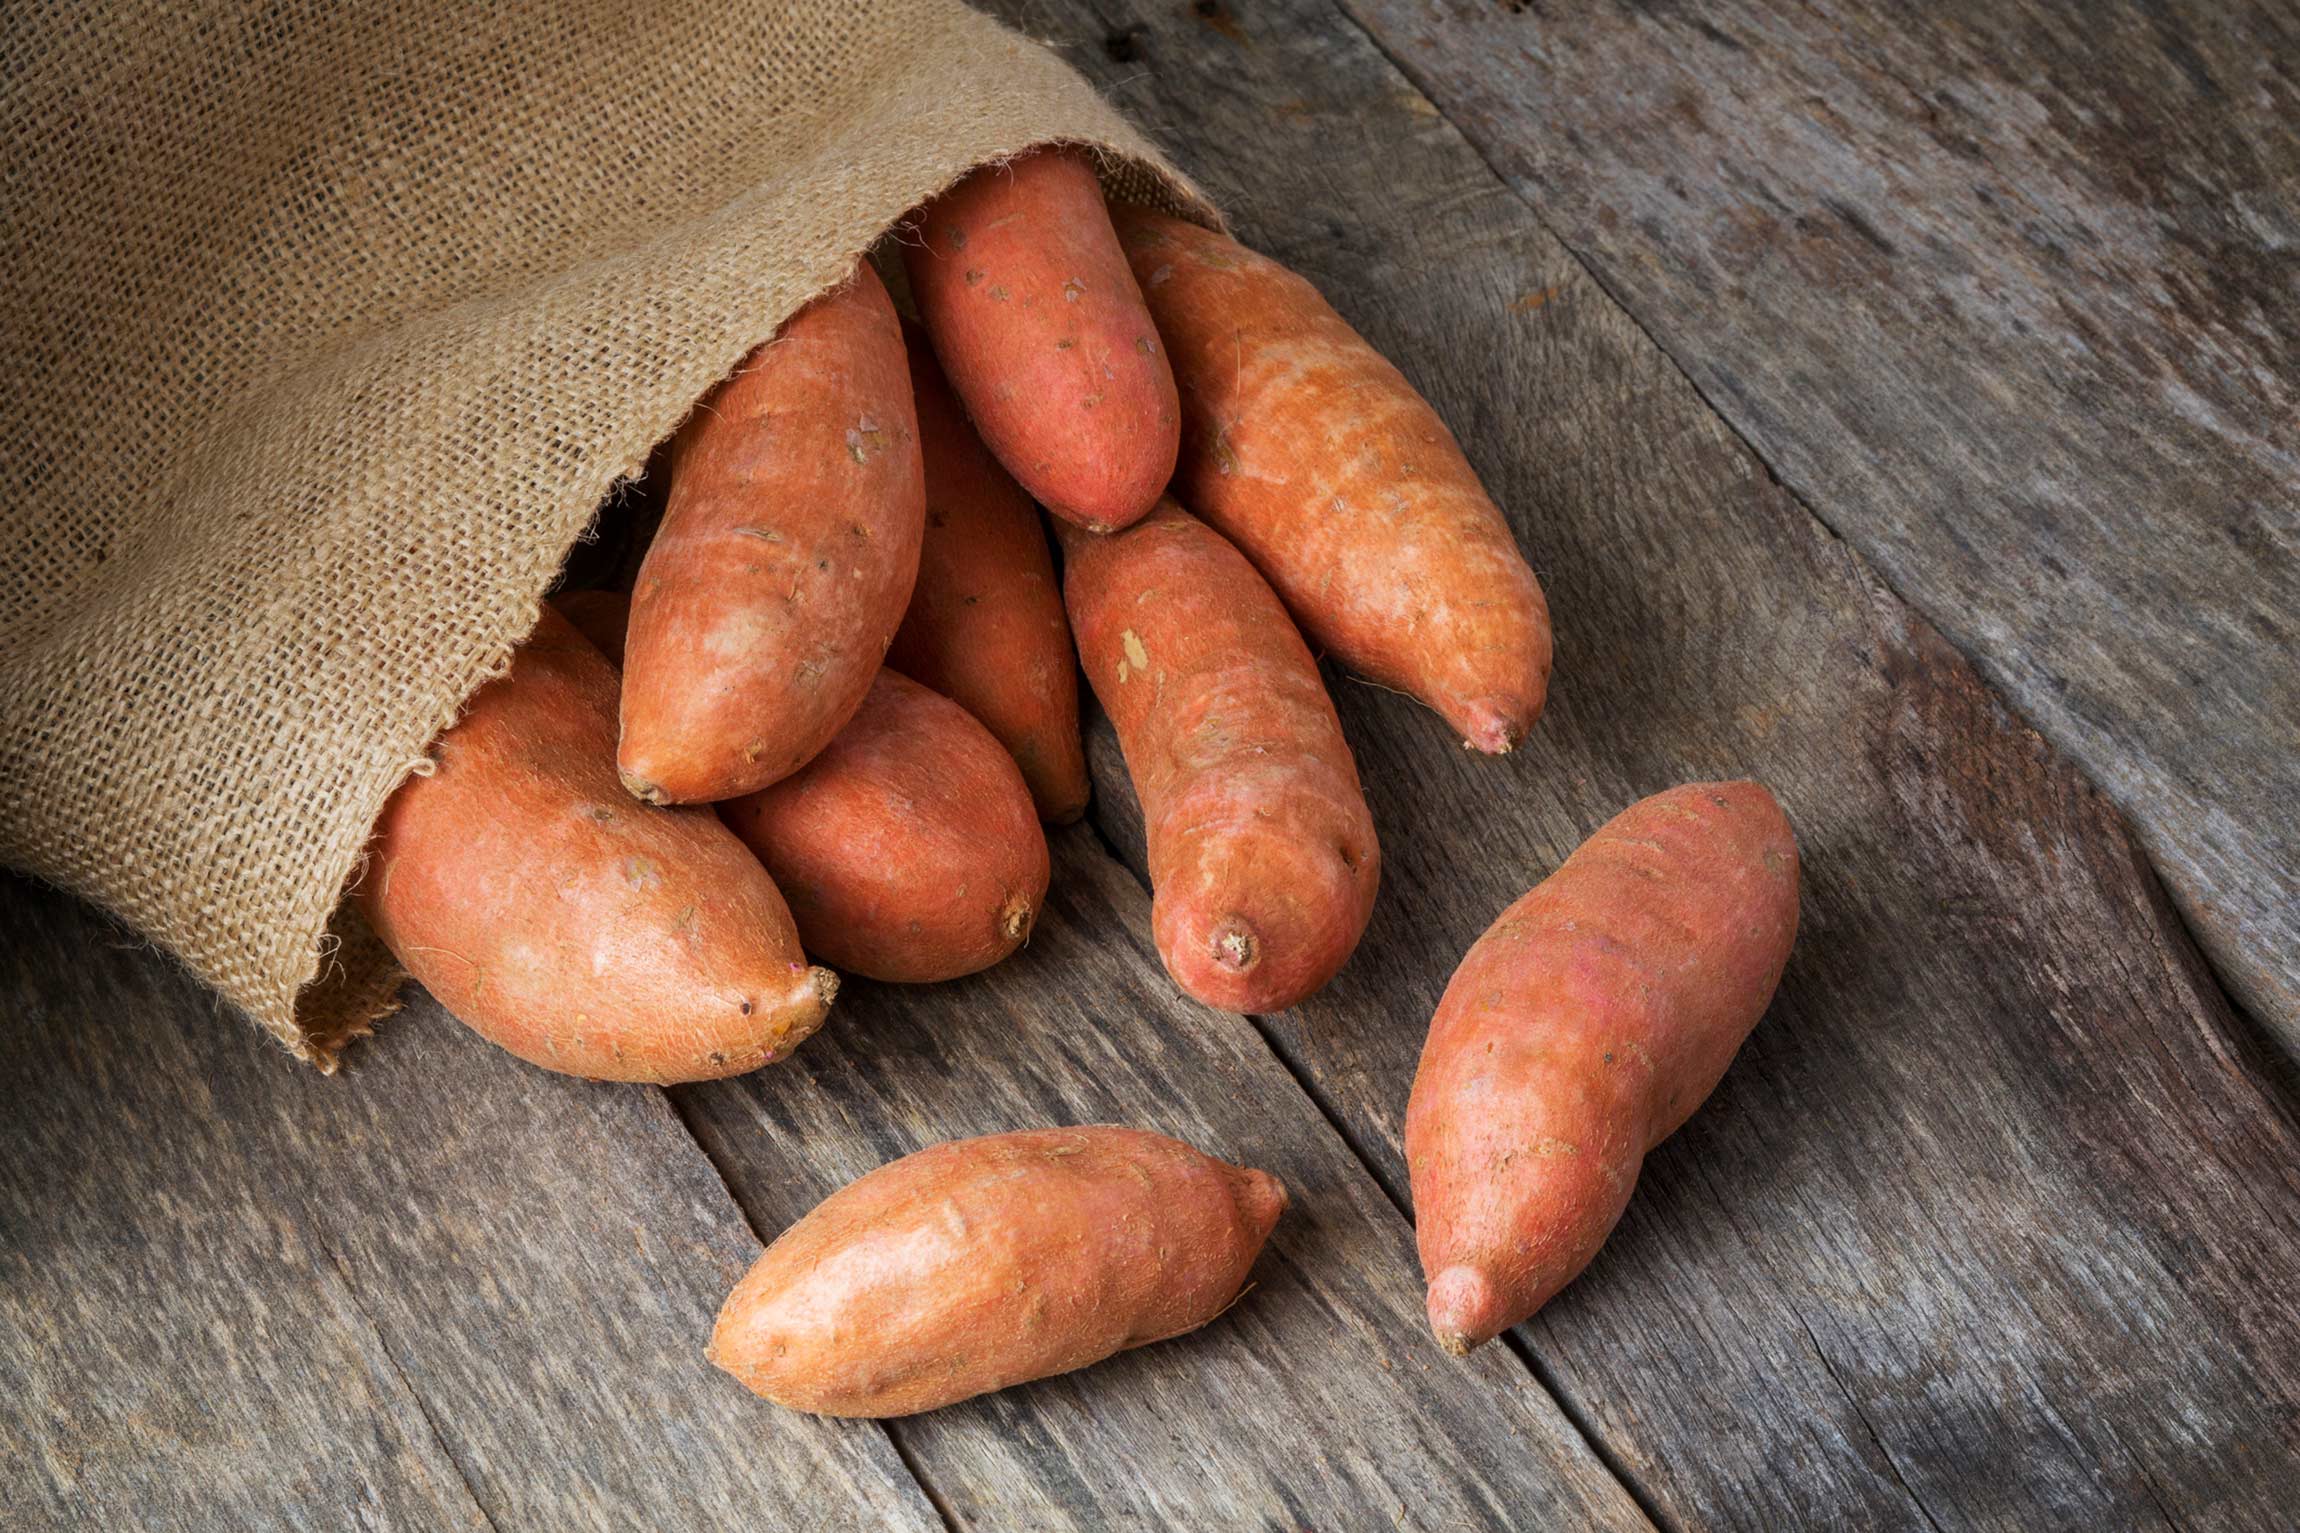 Sweet potatoes coming out of a burlap sack